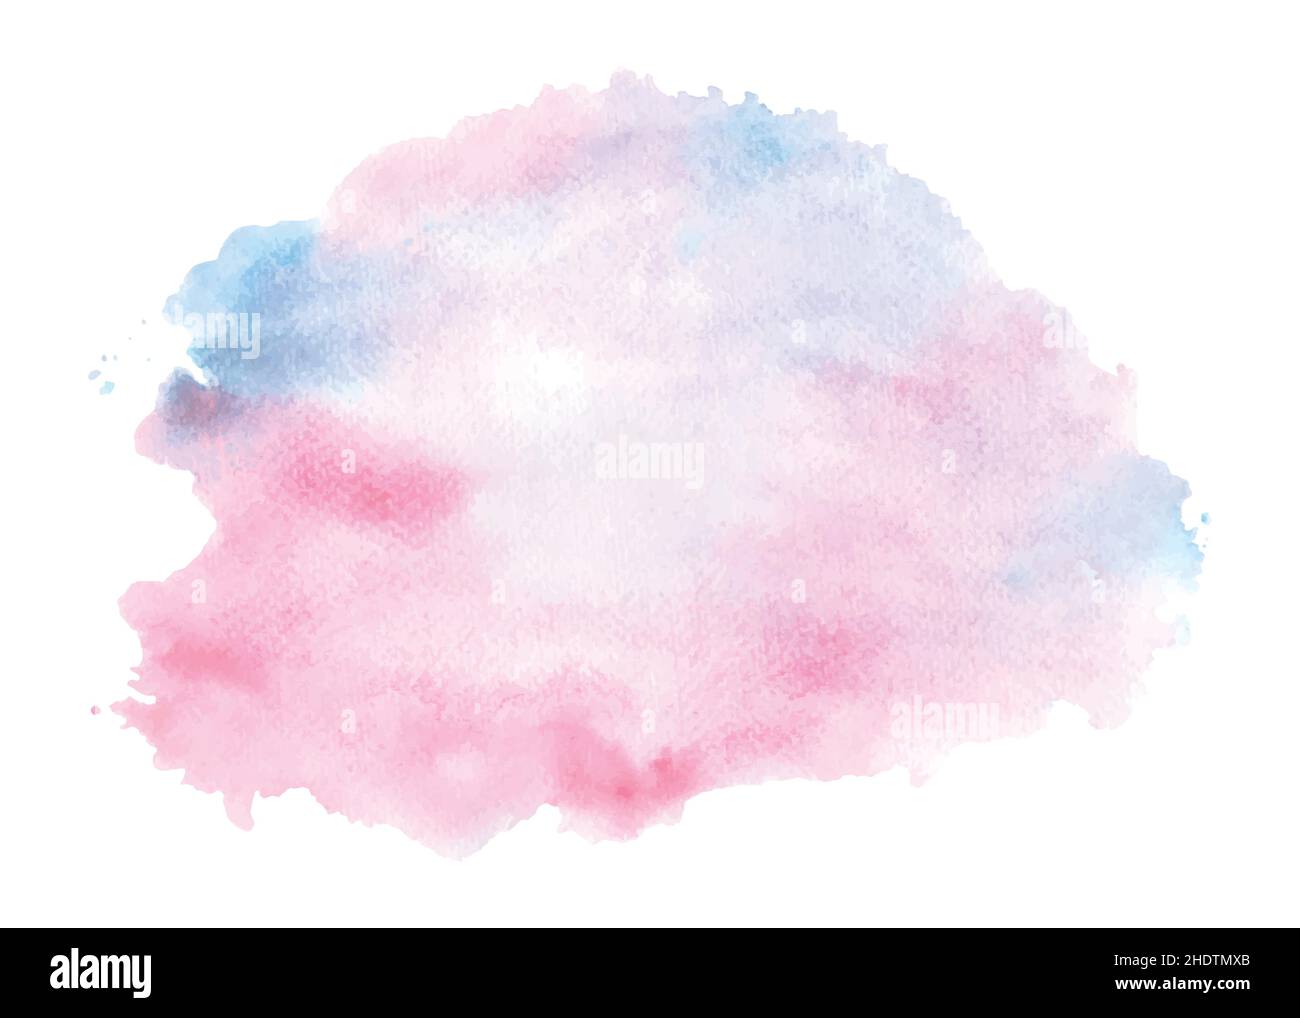 Abstract watercolor pink and blue paint texture isolated on white background. Hand-painted watercolor splatter stains artistic vector used as being an Stock Vector